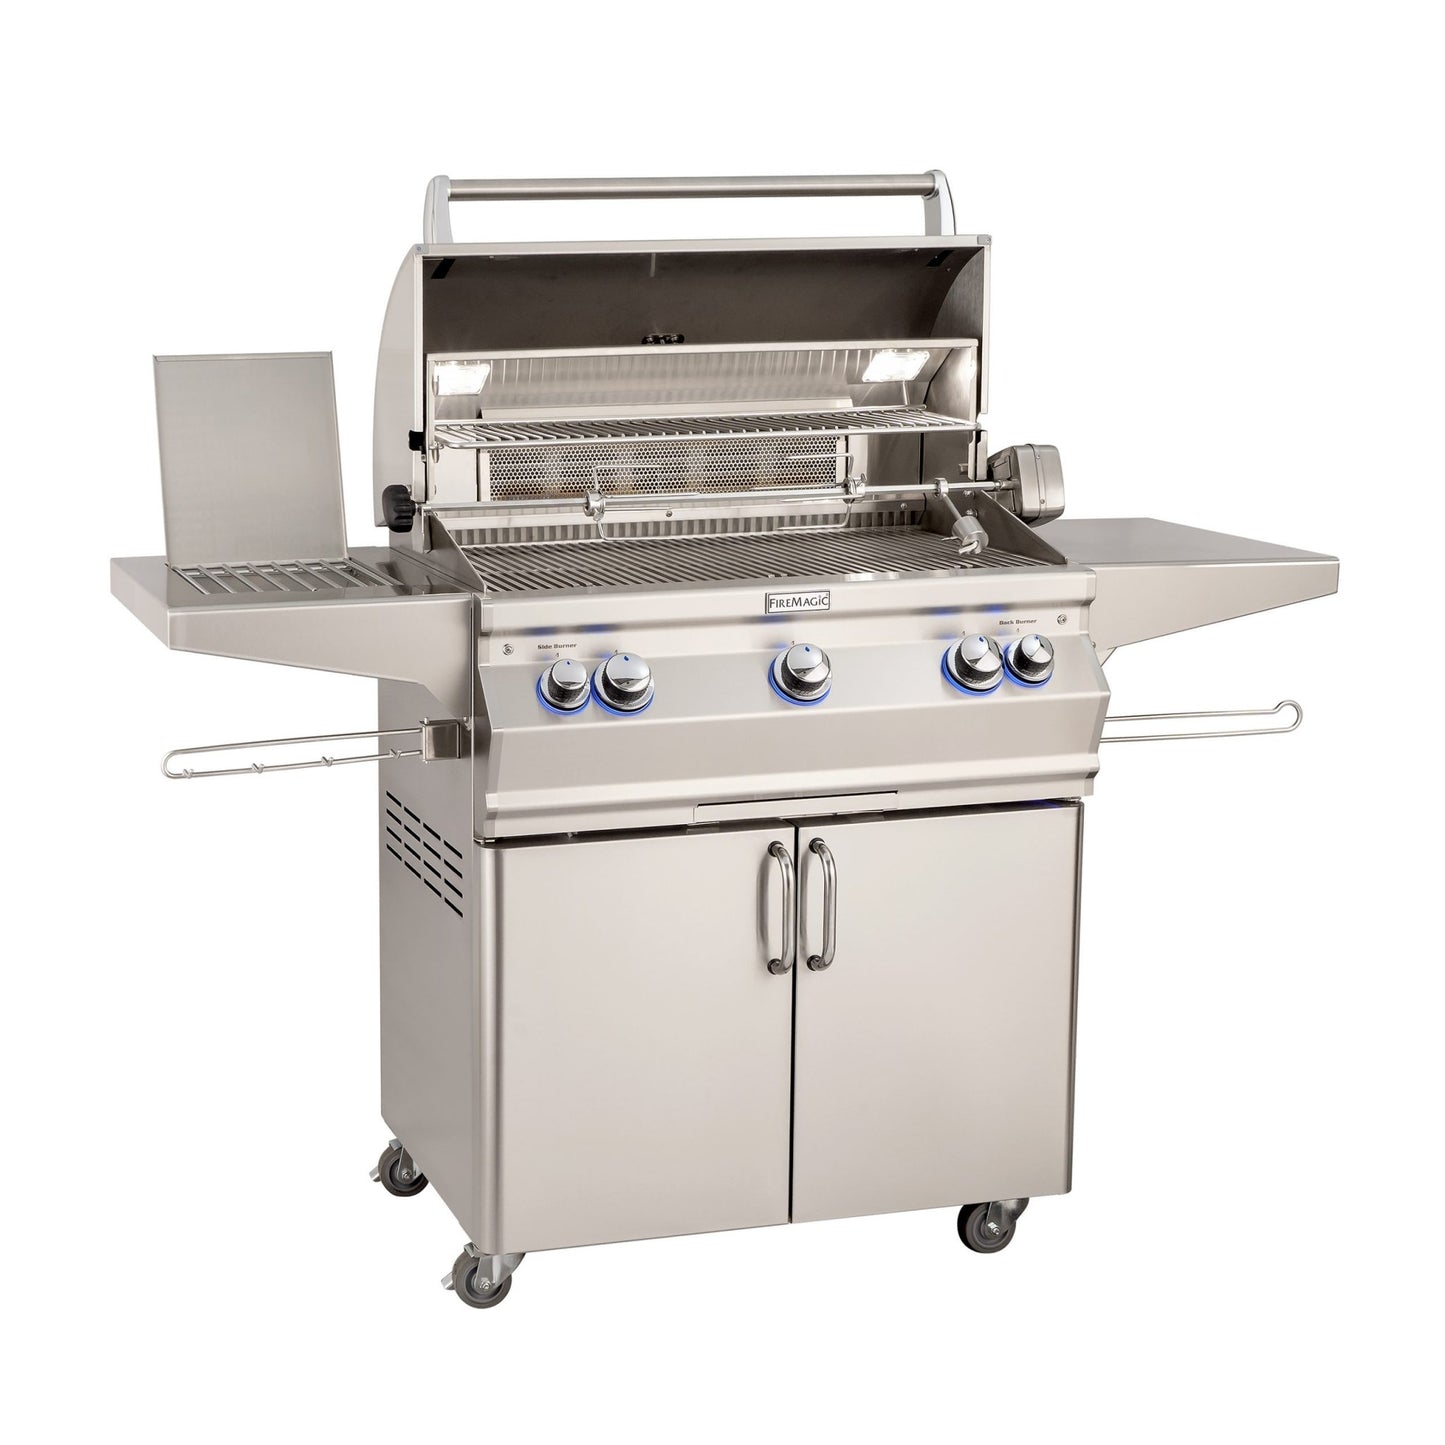 Fire Magic Aurora 30-Inch Portable Gas Grill With Single Side Burner -A540S - Grills N more